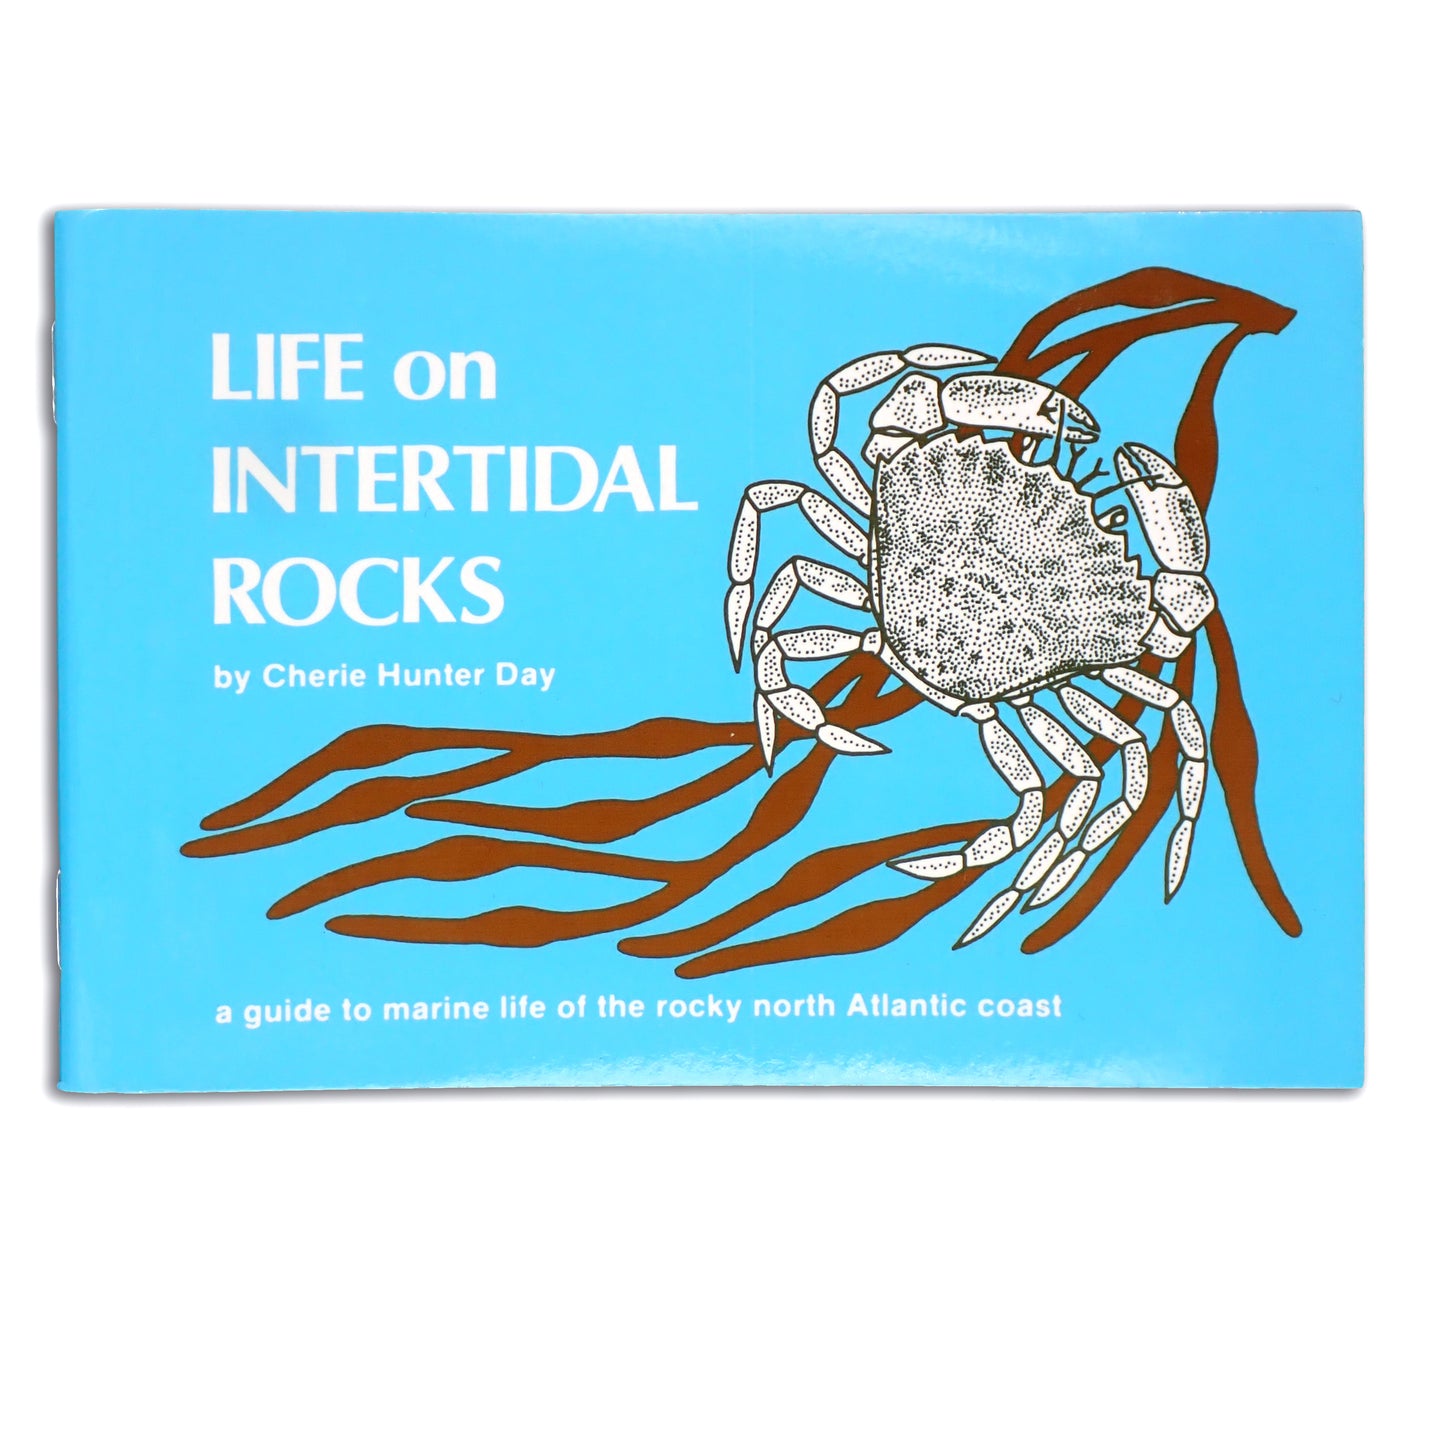 Life on Intertidal Rocks: a guide to marine life of the rocky north Atlantic coast - Cherie Hunter Day